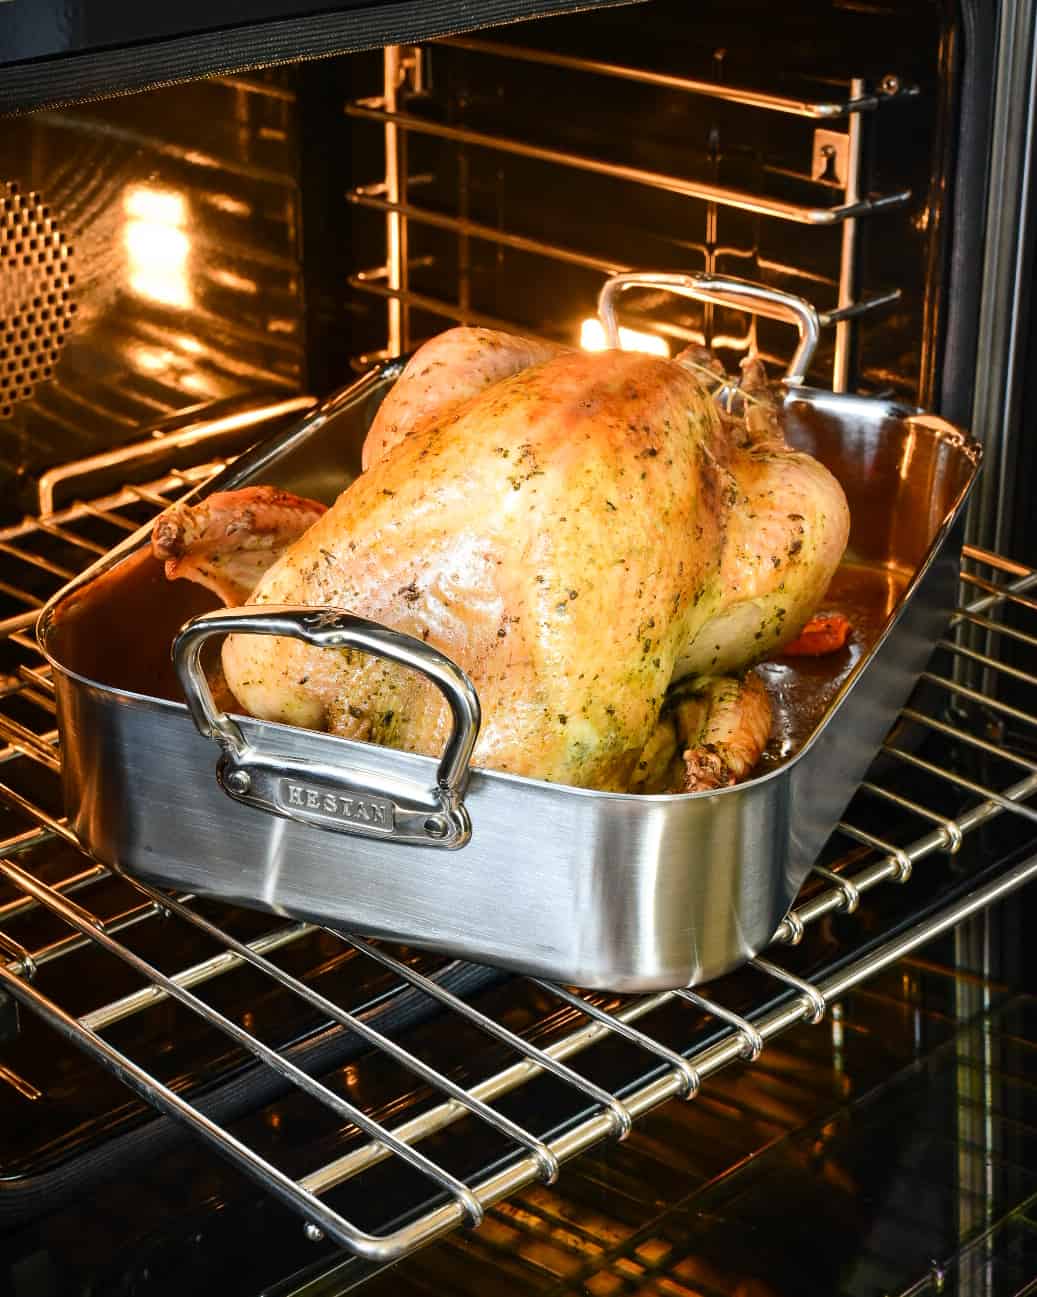 A golden roasted turkey in a roasting pan in the oven.